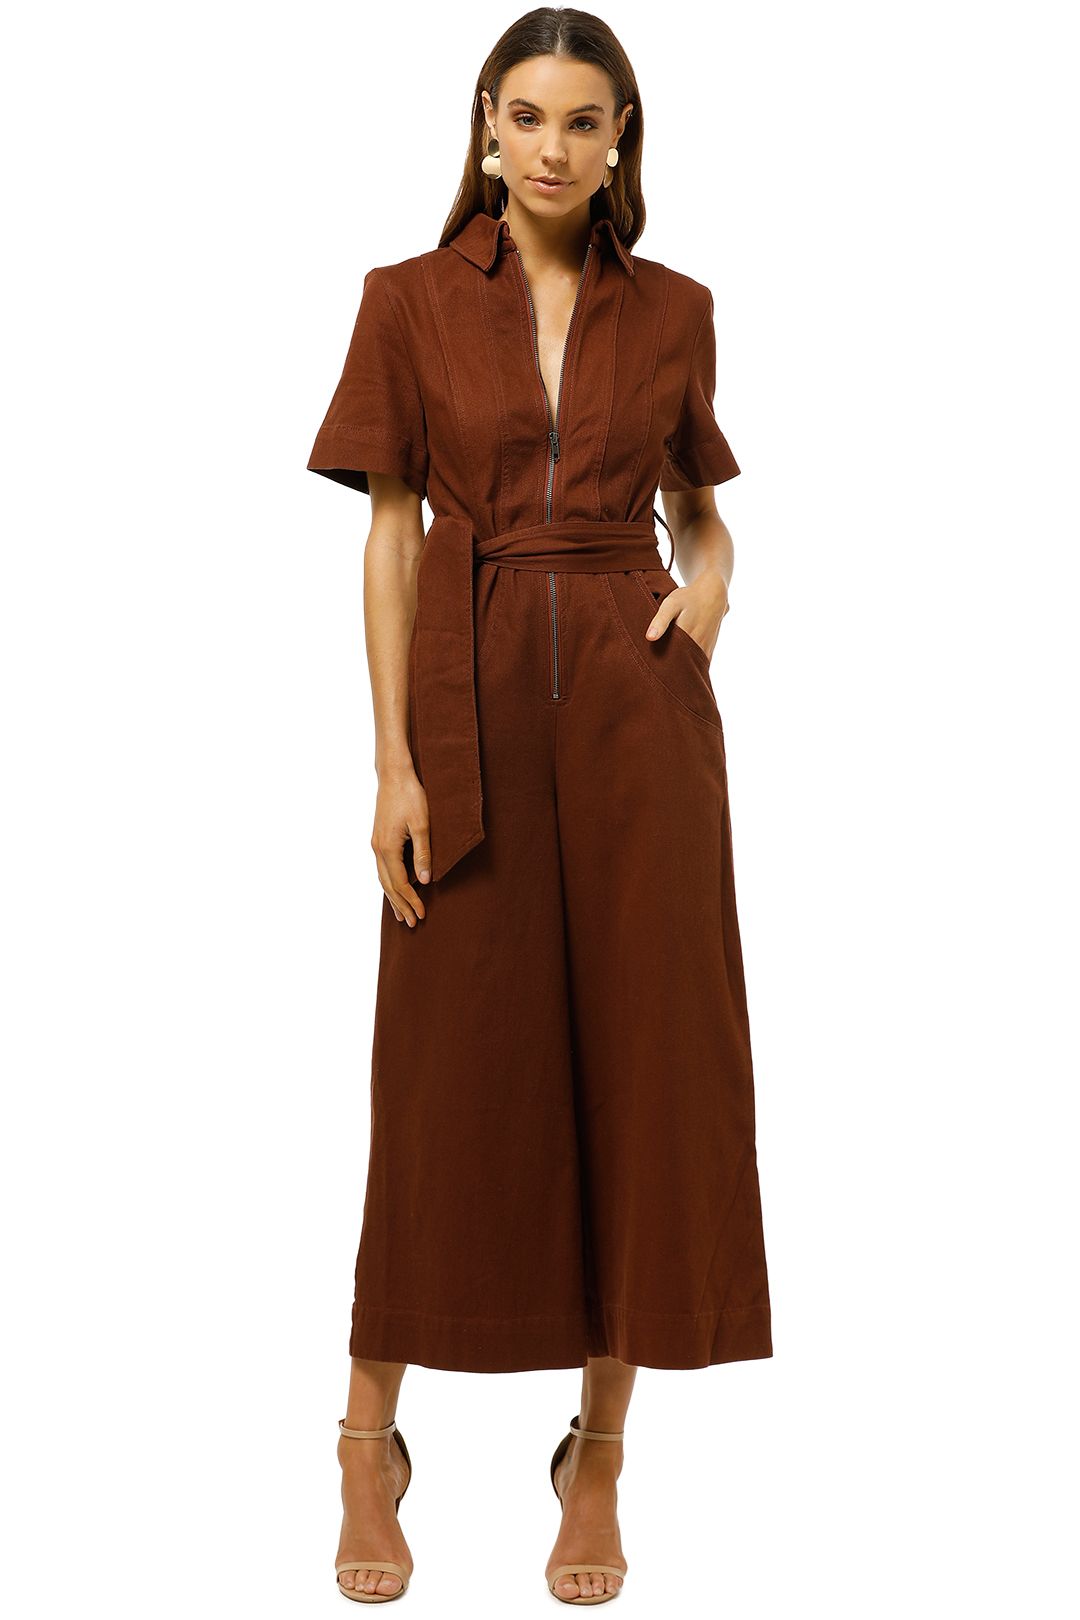 CMEO-Collective-Regardless-Jumpsuit-Mahogany-Front